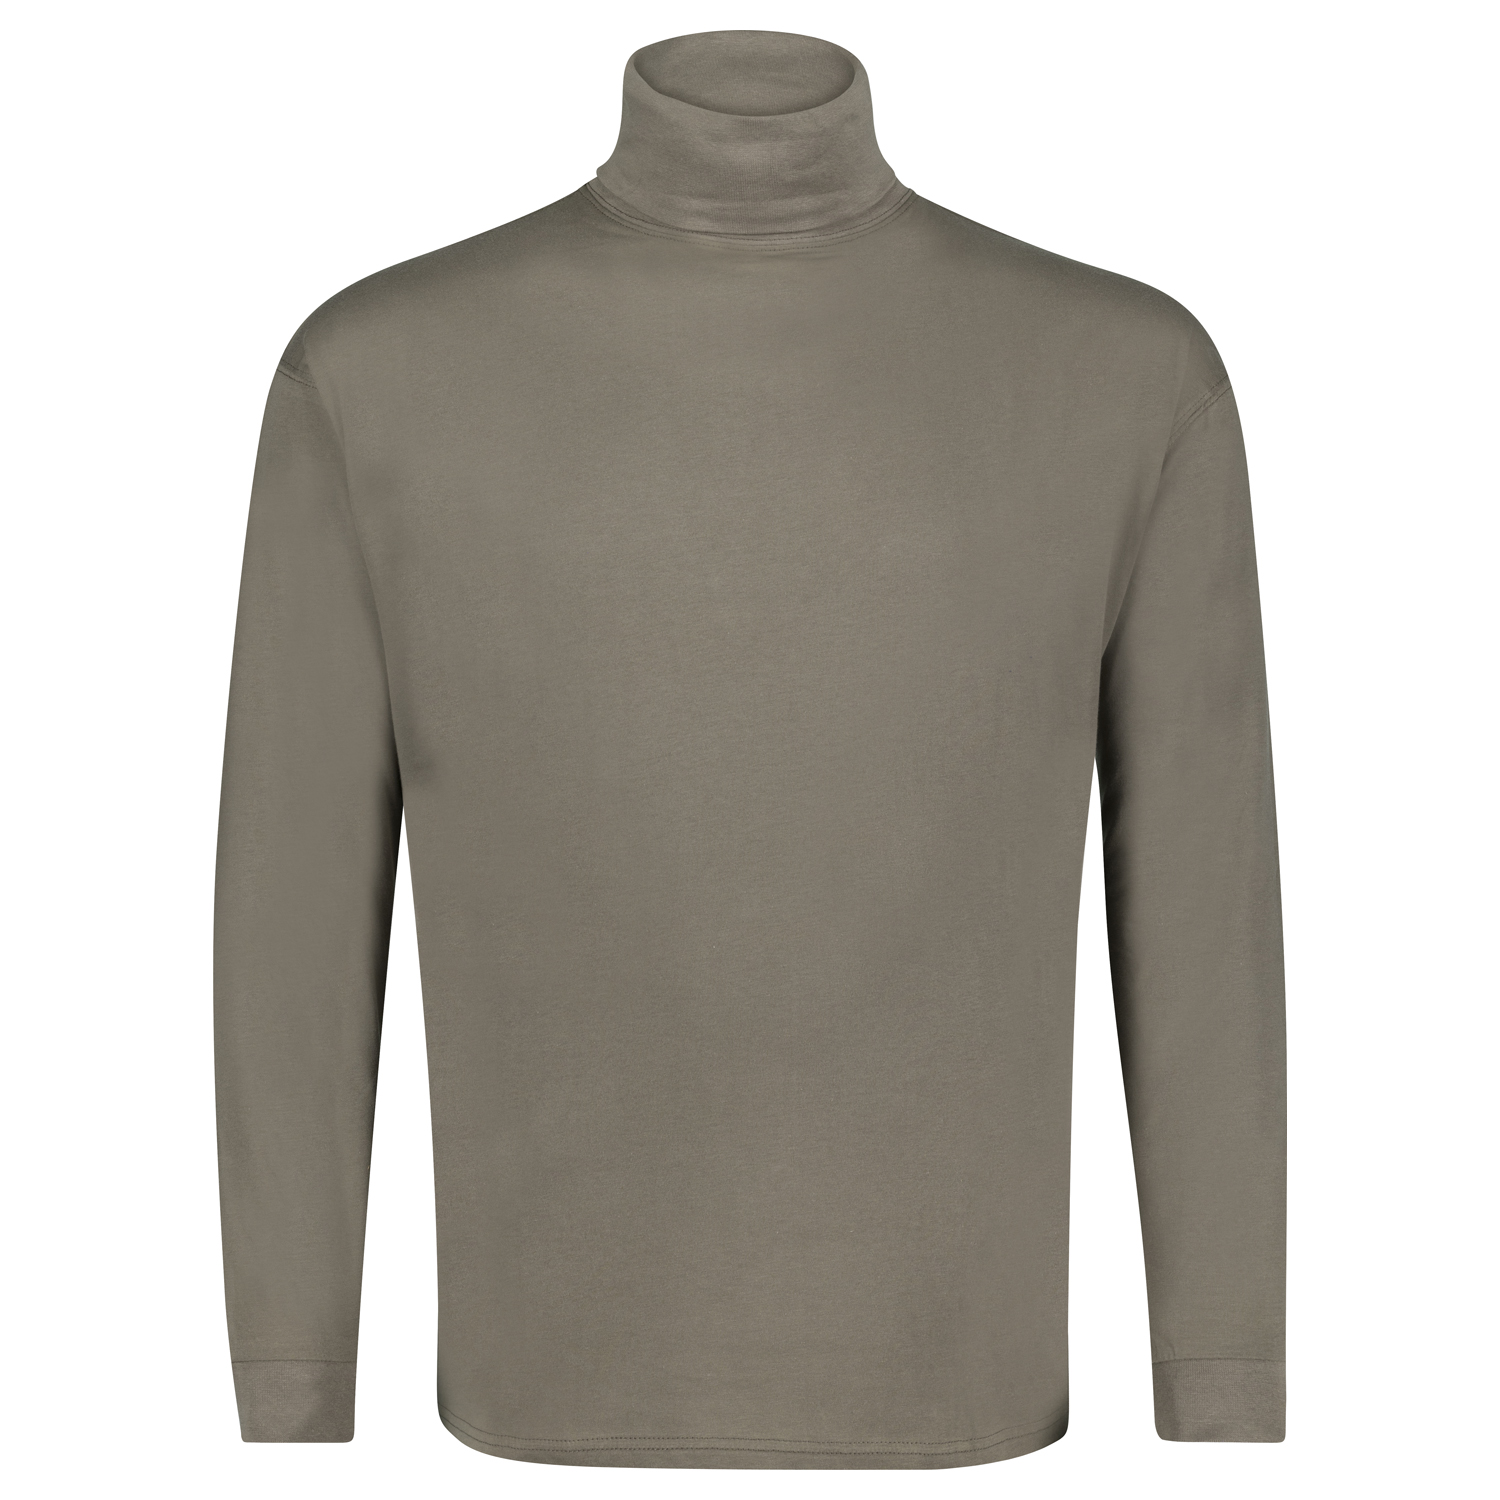 ADAMO longsleeve for men COMFORT FIT in khaki with turtle neck up to size 12XL